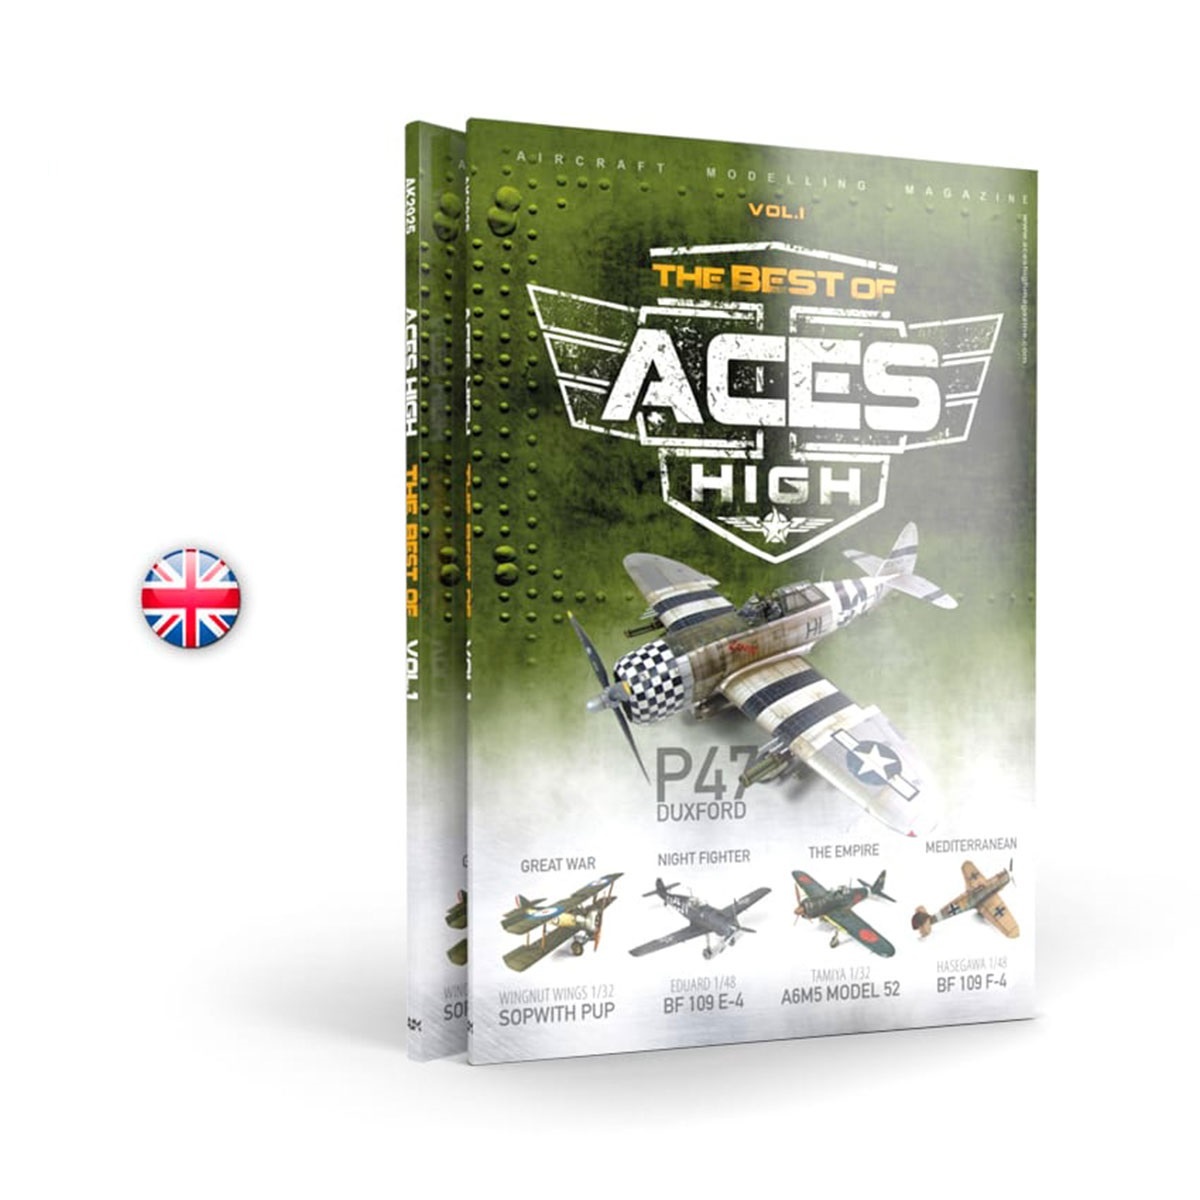 Aces High Aces High Magazine The Best Of. Vol1 - AK-Interactive - AK-2925